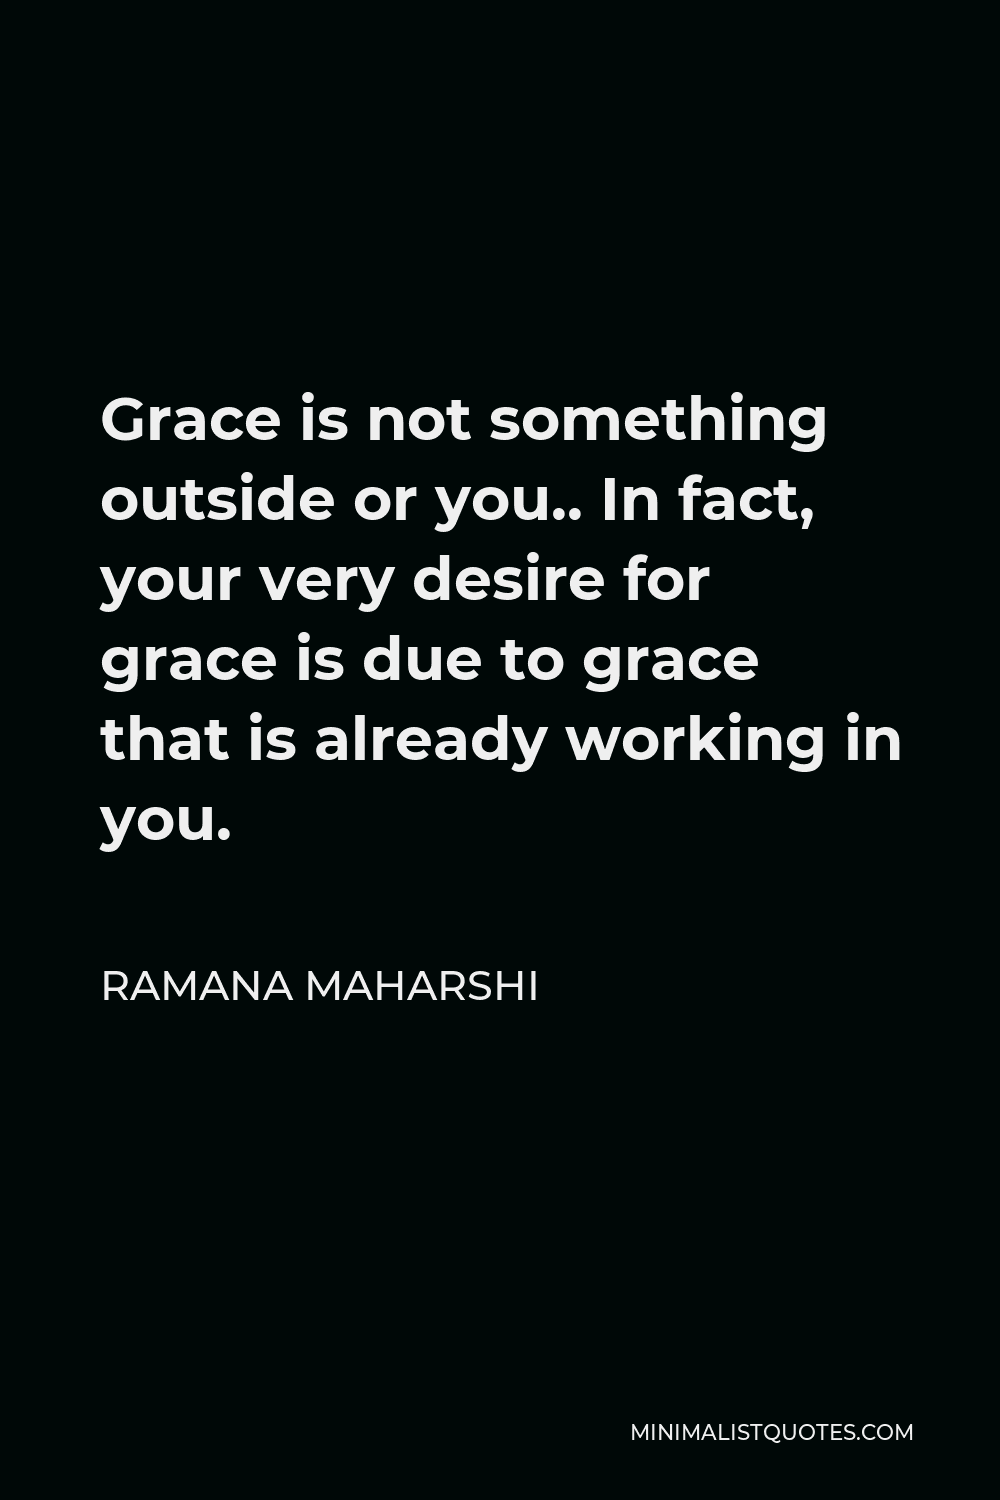 Ramana Maharshi Quote - Grace is not something outside or you.. In fact, your very desire for grace is due to grace that is already working in you.